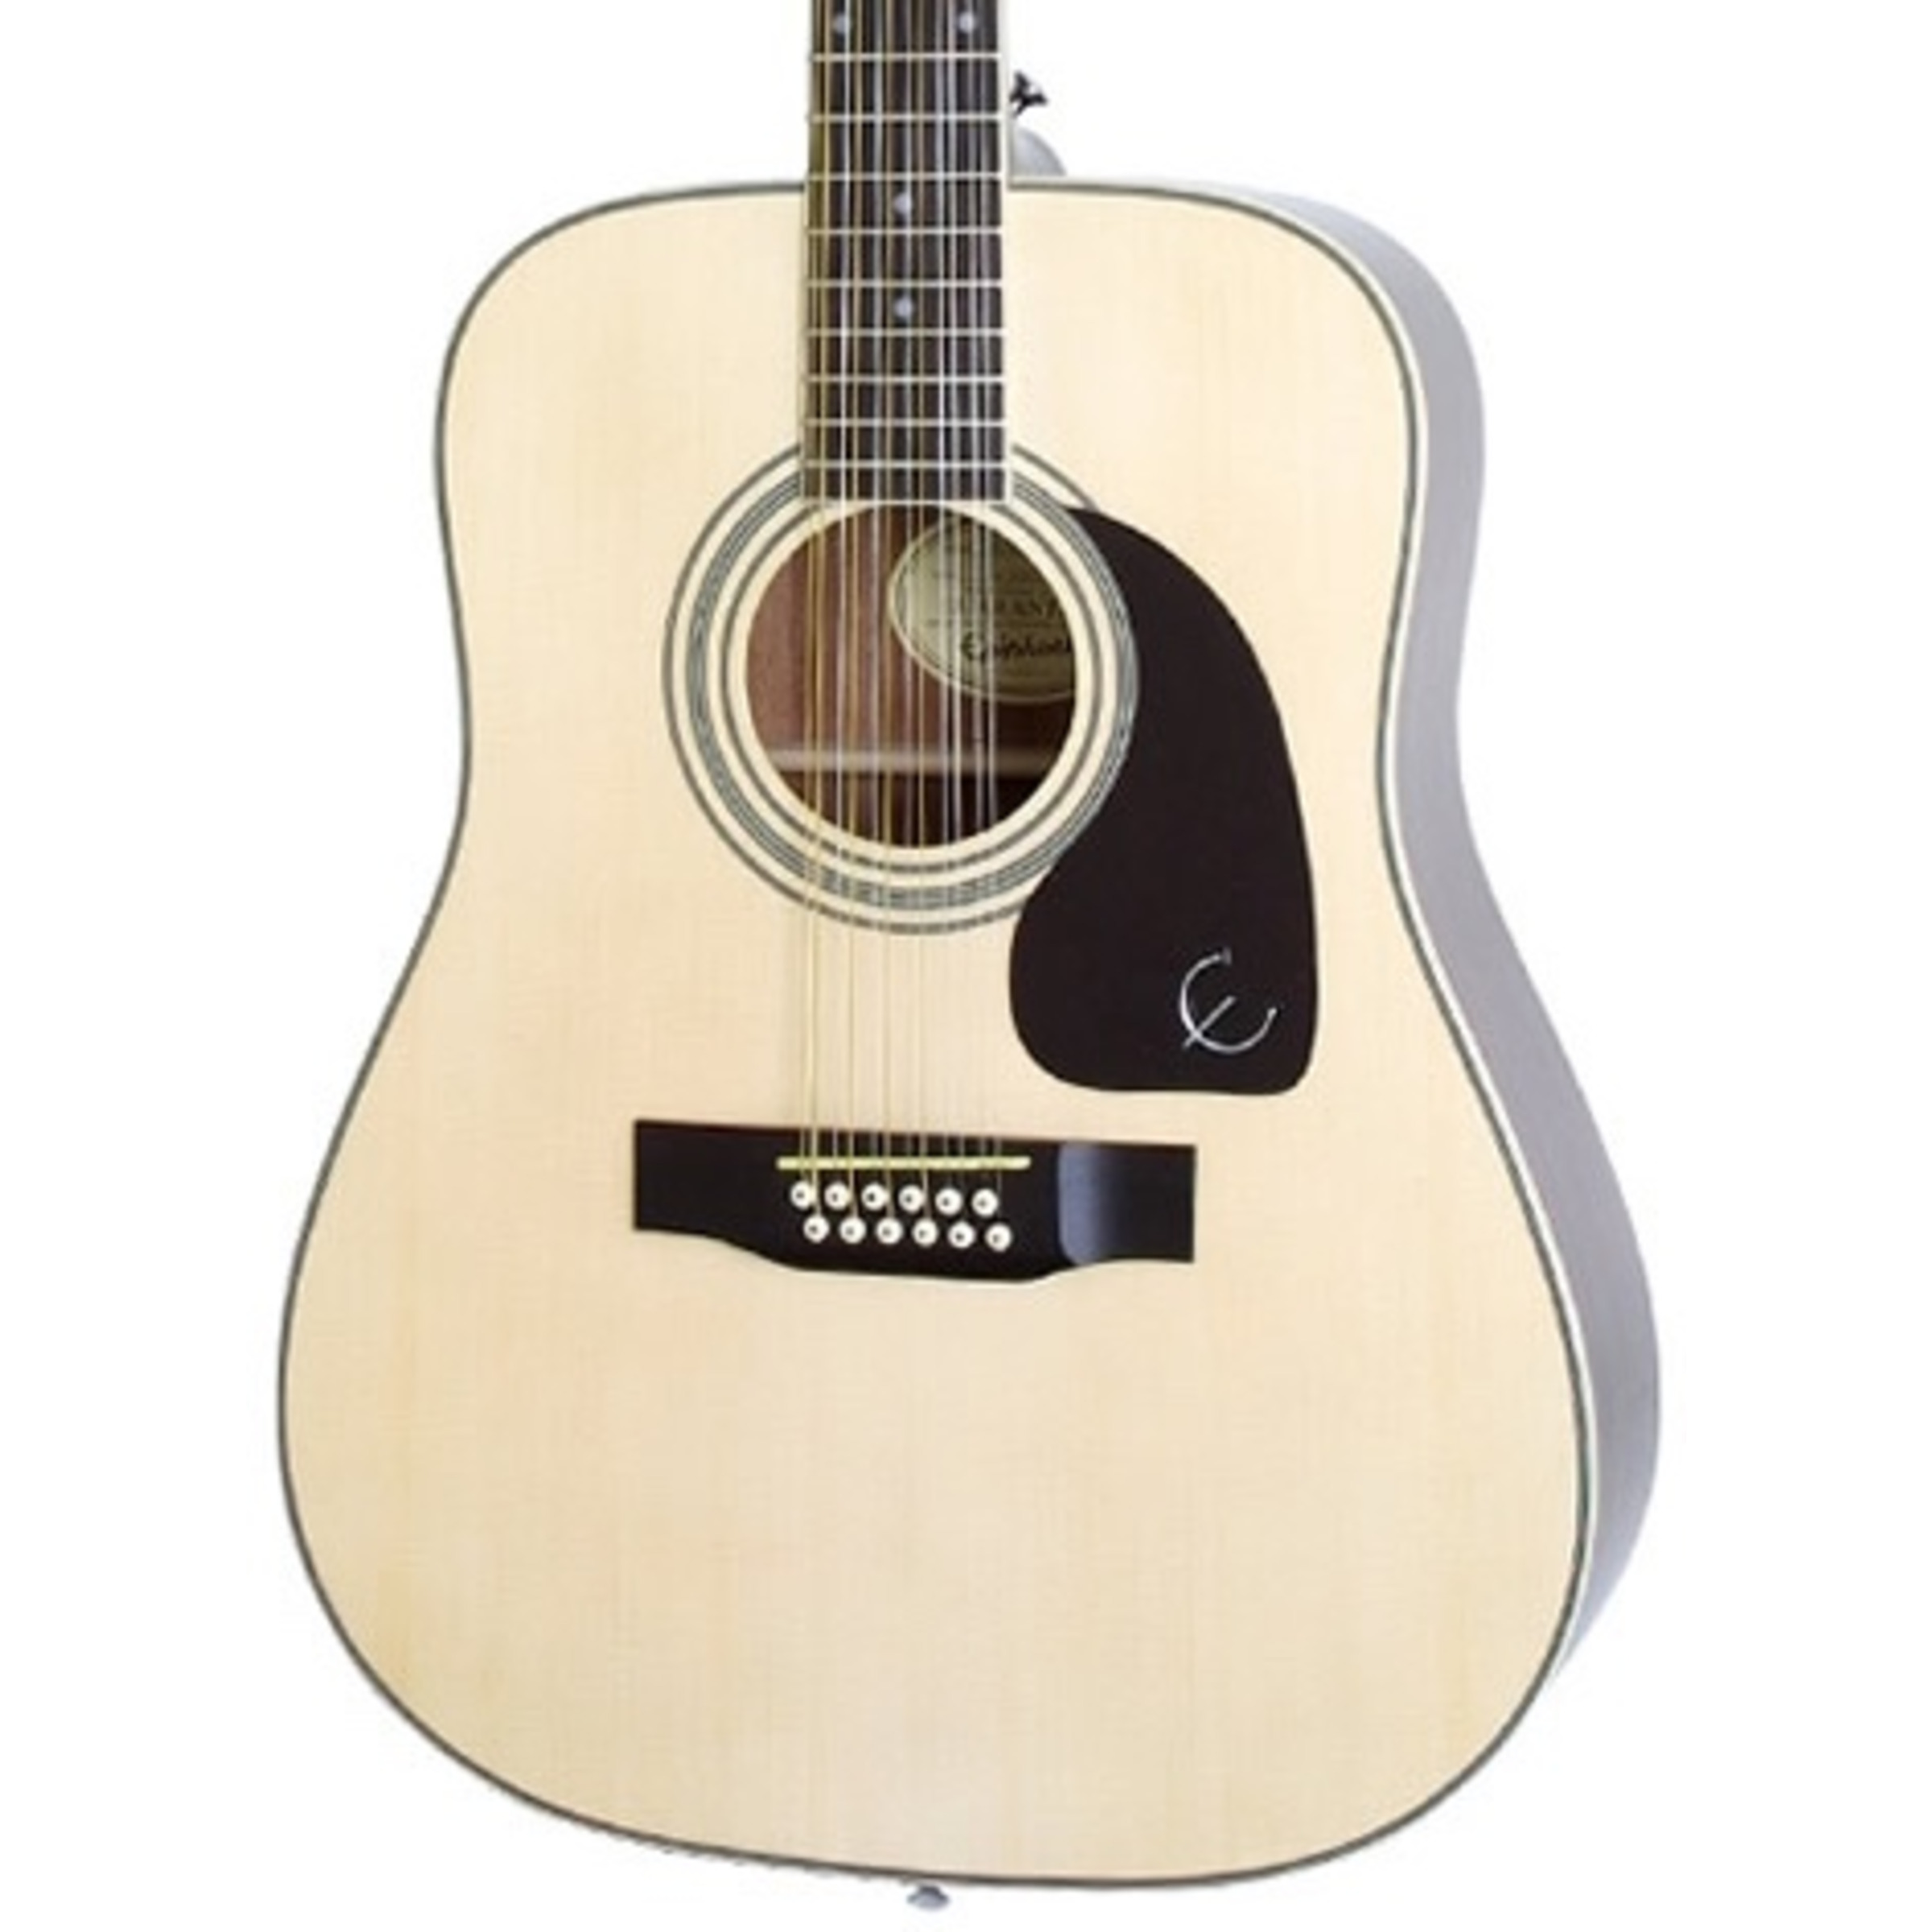 Epiphone DR-212 12-String Acoustic Guitar - GigGear